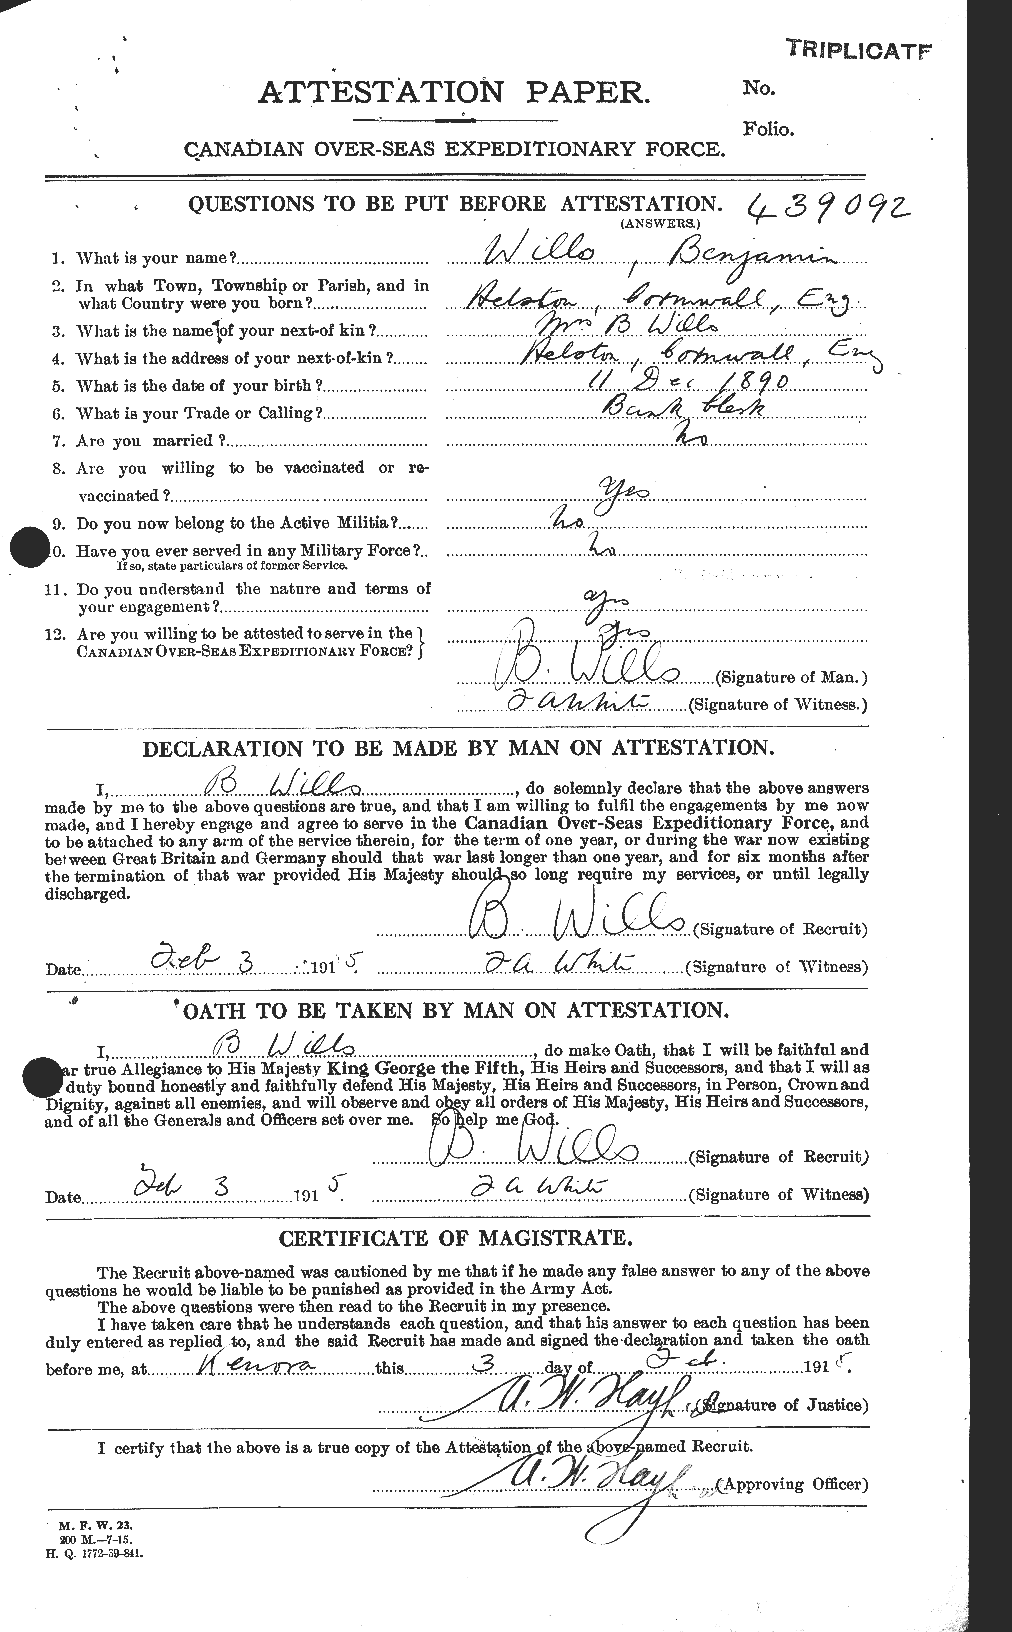 Personnel Records of the First World War - CEF 678373a